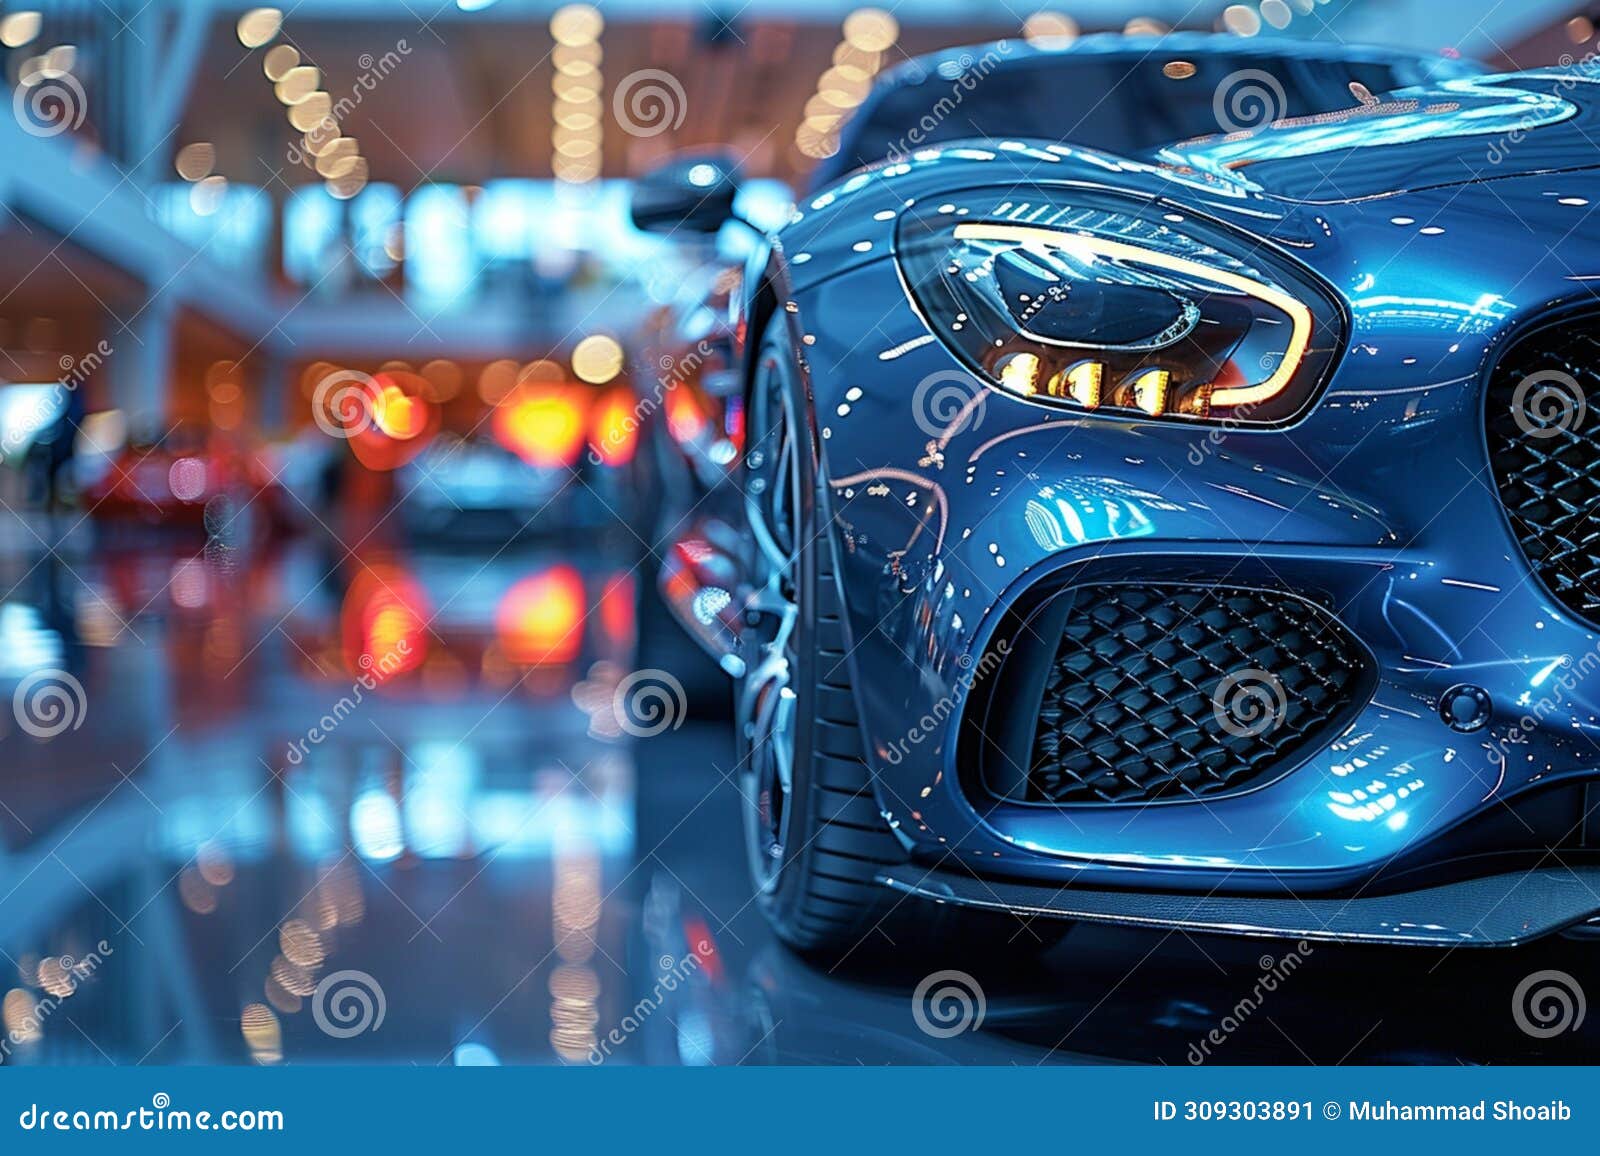 automotive elegance captured in close up view of impeccable grille